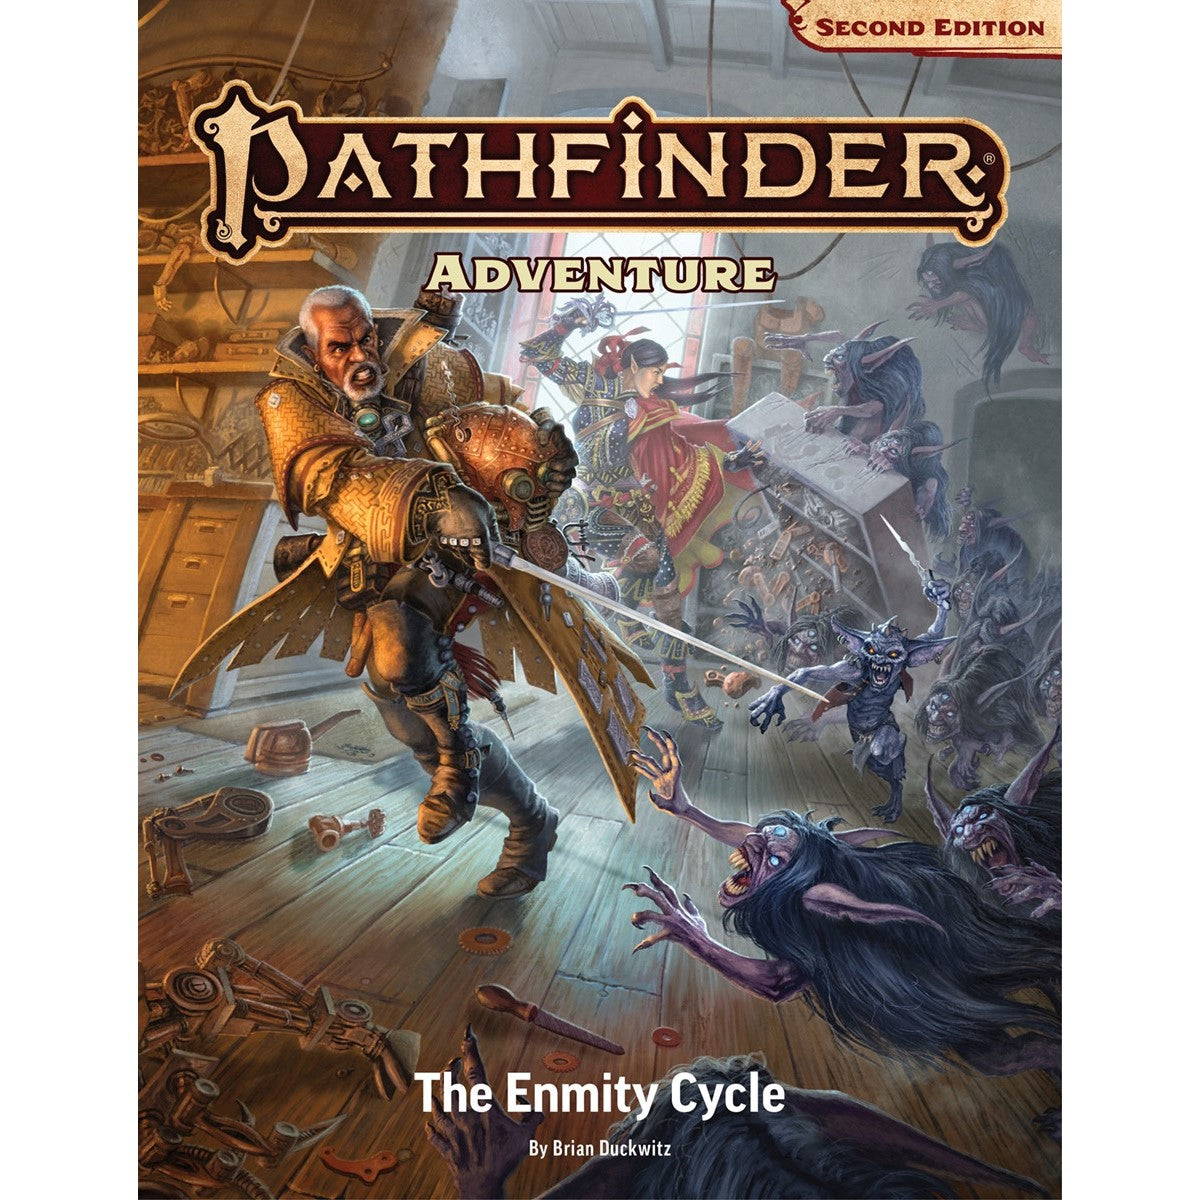 Pathfinder Second Edition Adventure: The Enmity Cycle